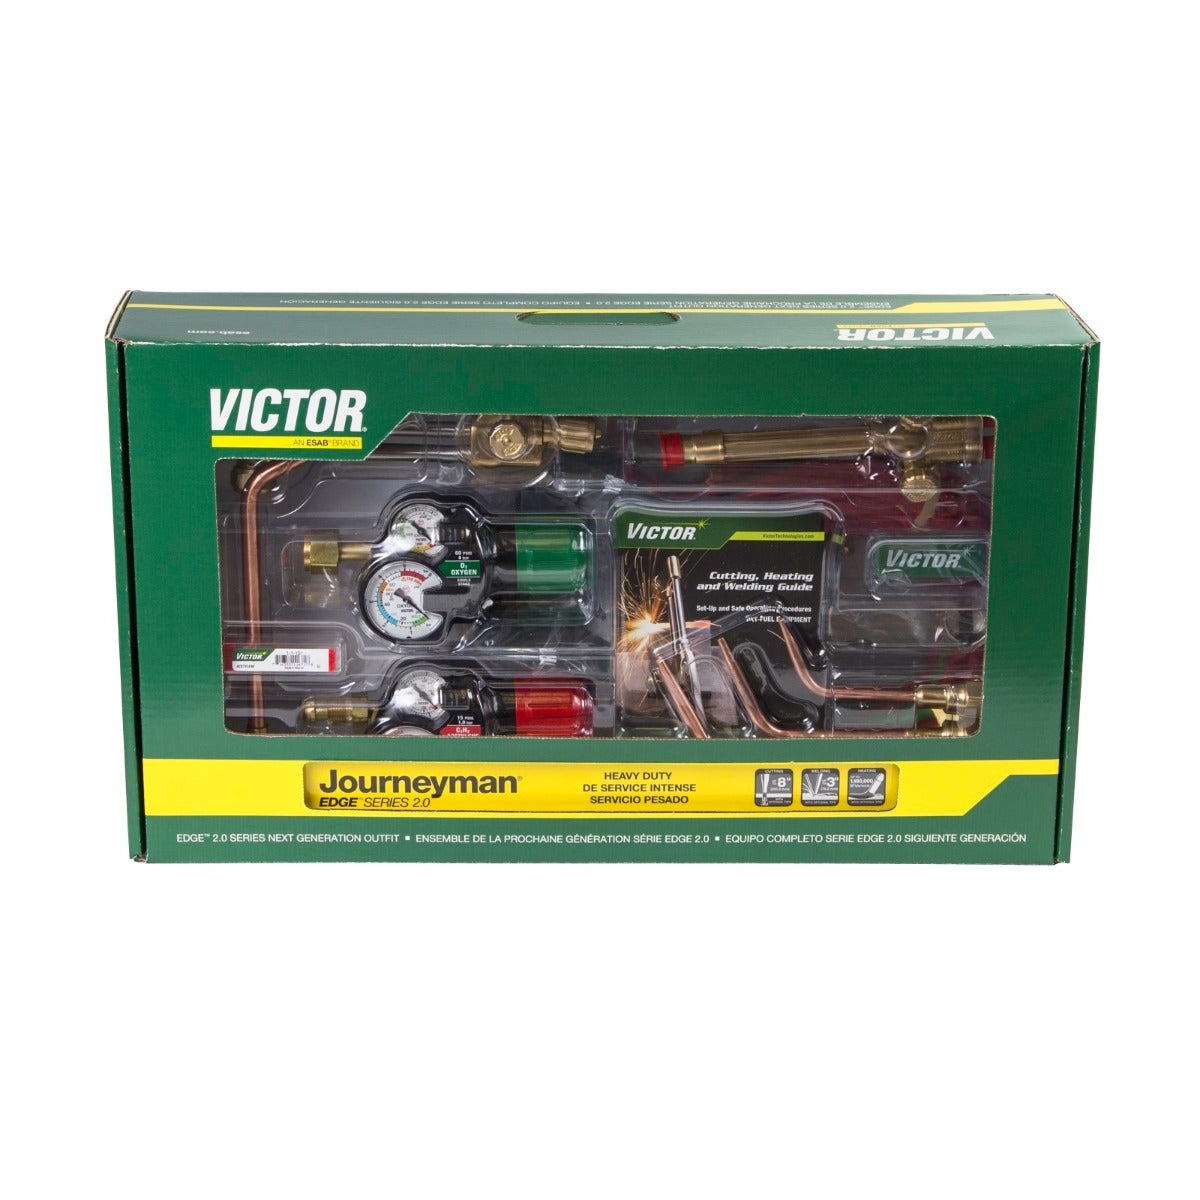 Victor Journeyman Welding and Cutting Outfit (0384-2100)